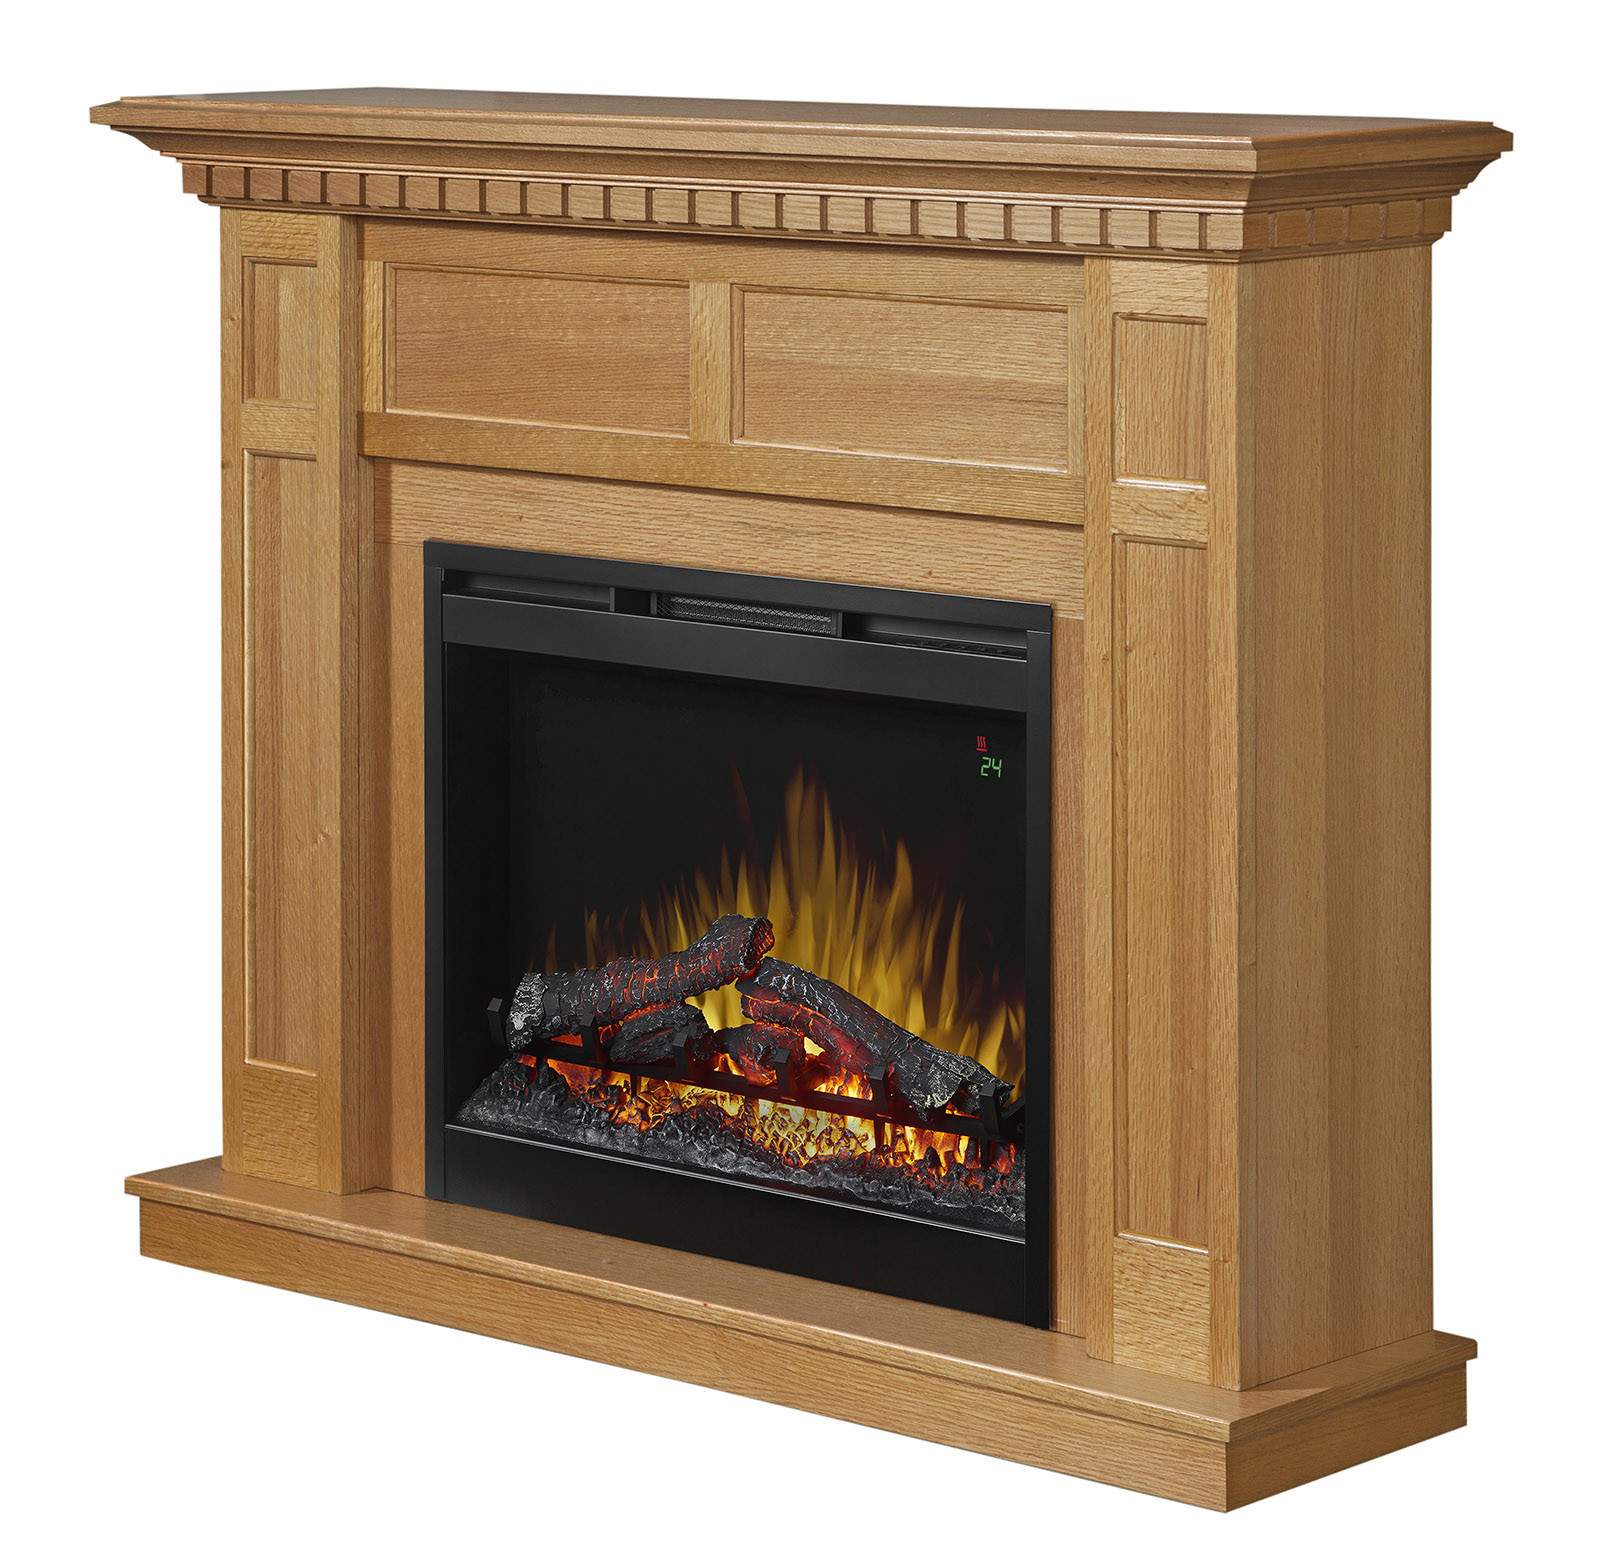 Electric Fireplace Foyer
 Electric Fireplaces Fireplaces Mantels Mantels Dimplex